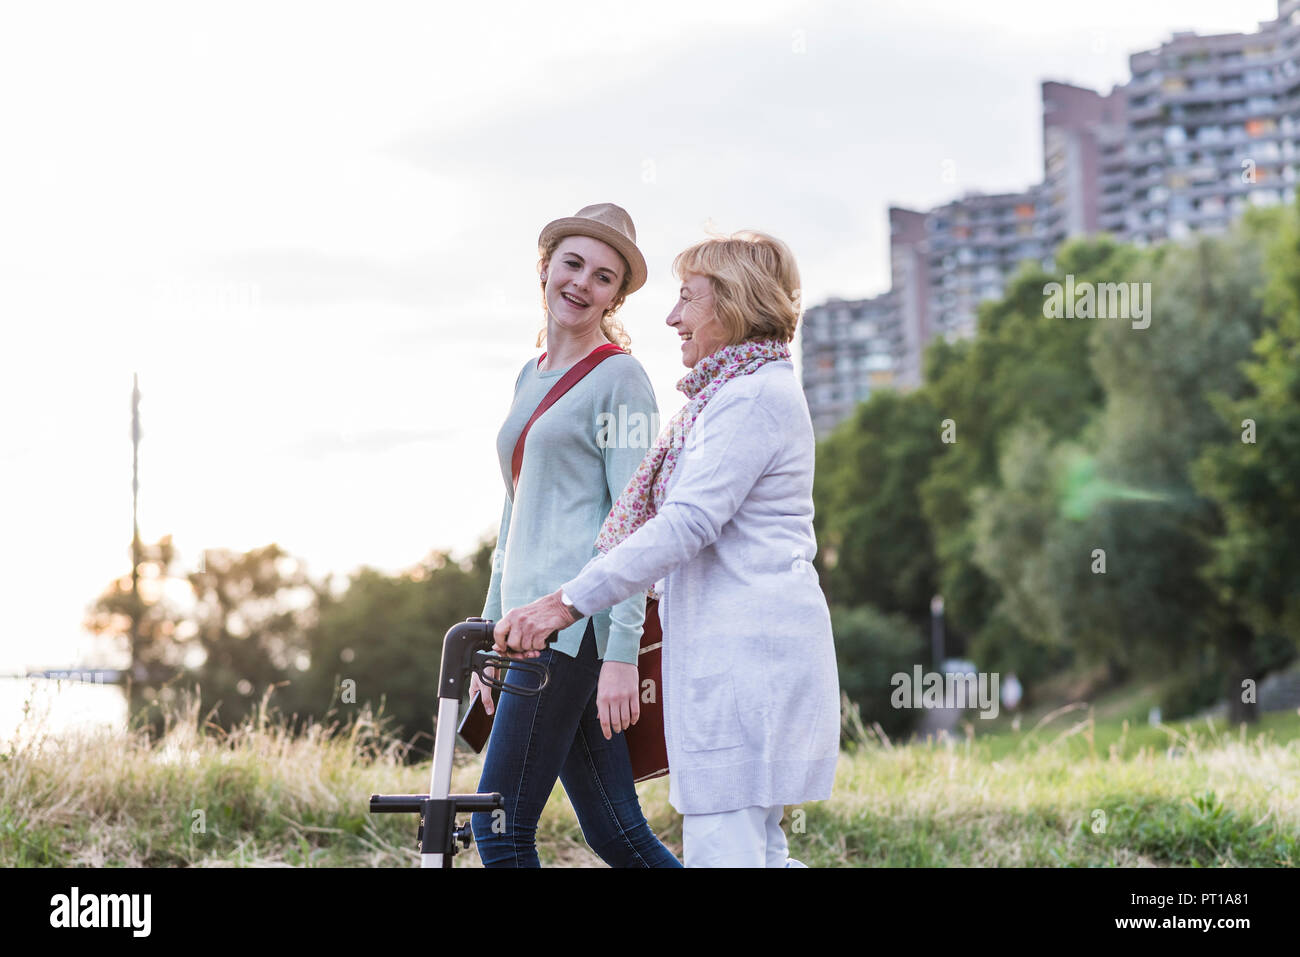 Grandmother and granddaughter spending time together Stock Photo